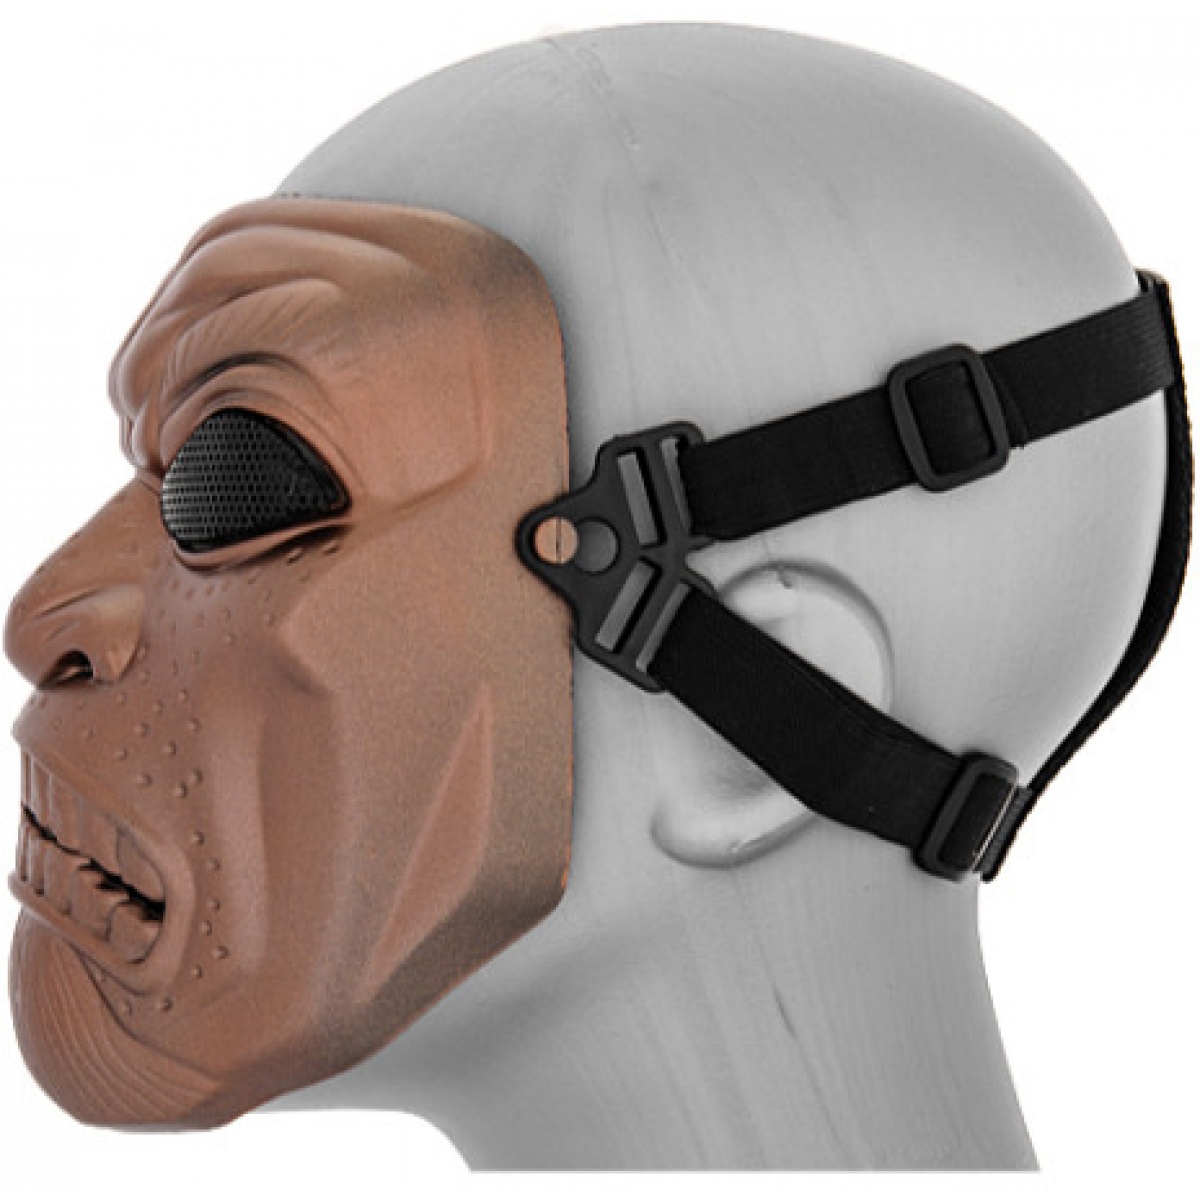 New Airsoft Man Face Plastic Mask Tan